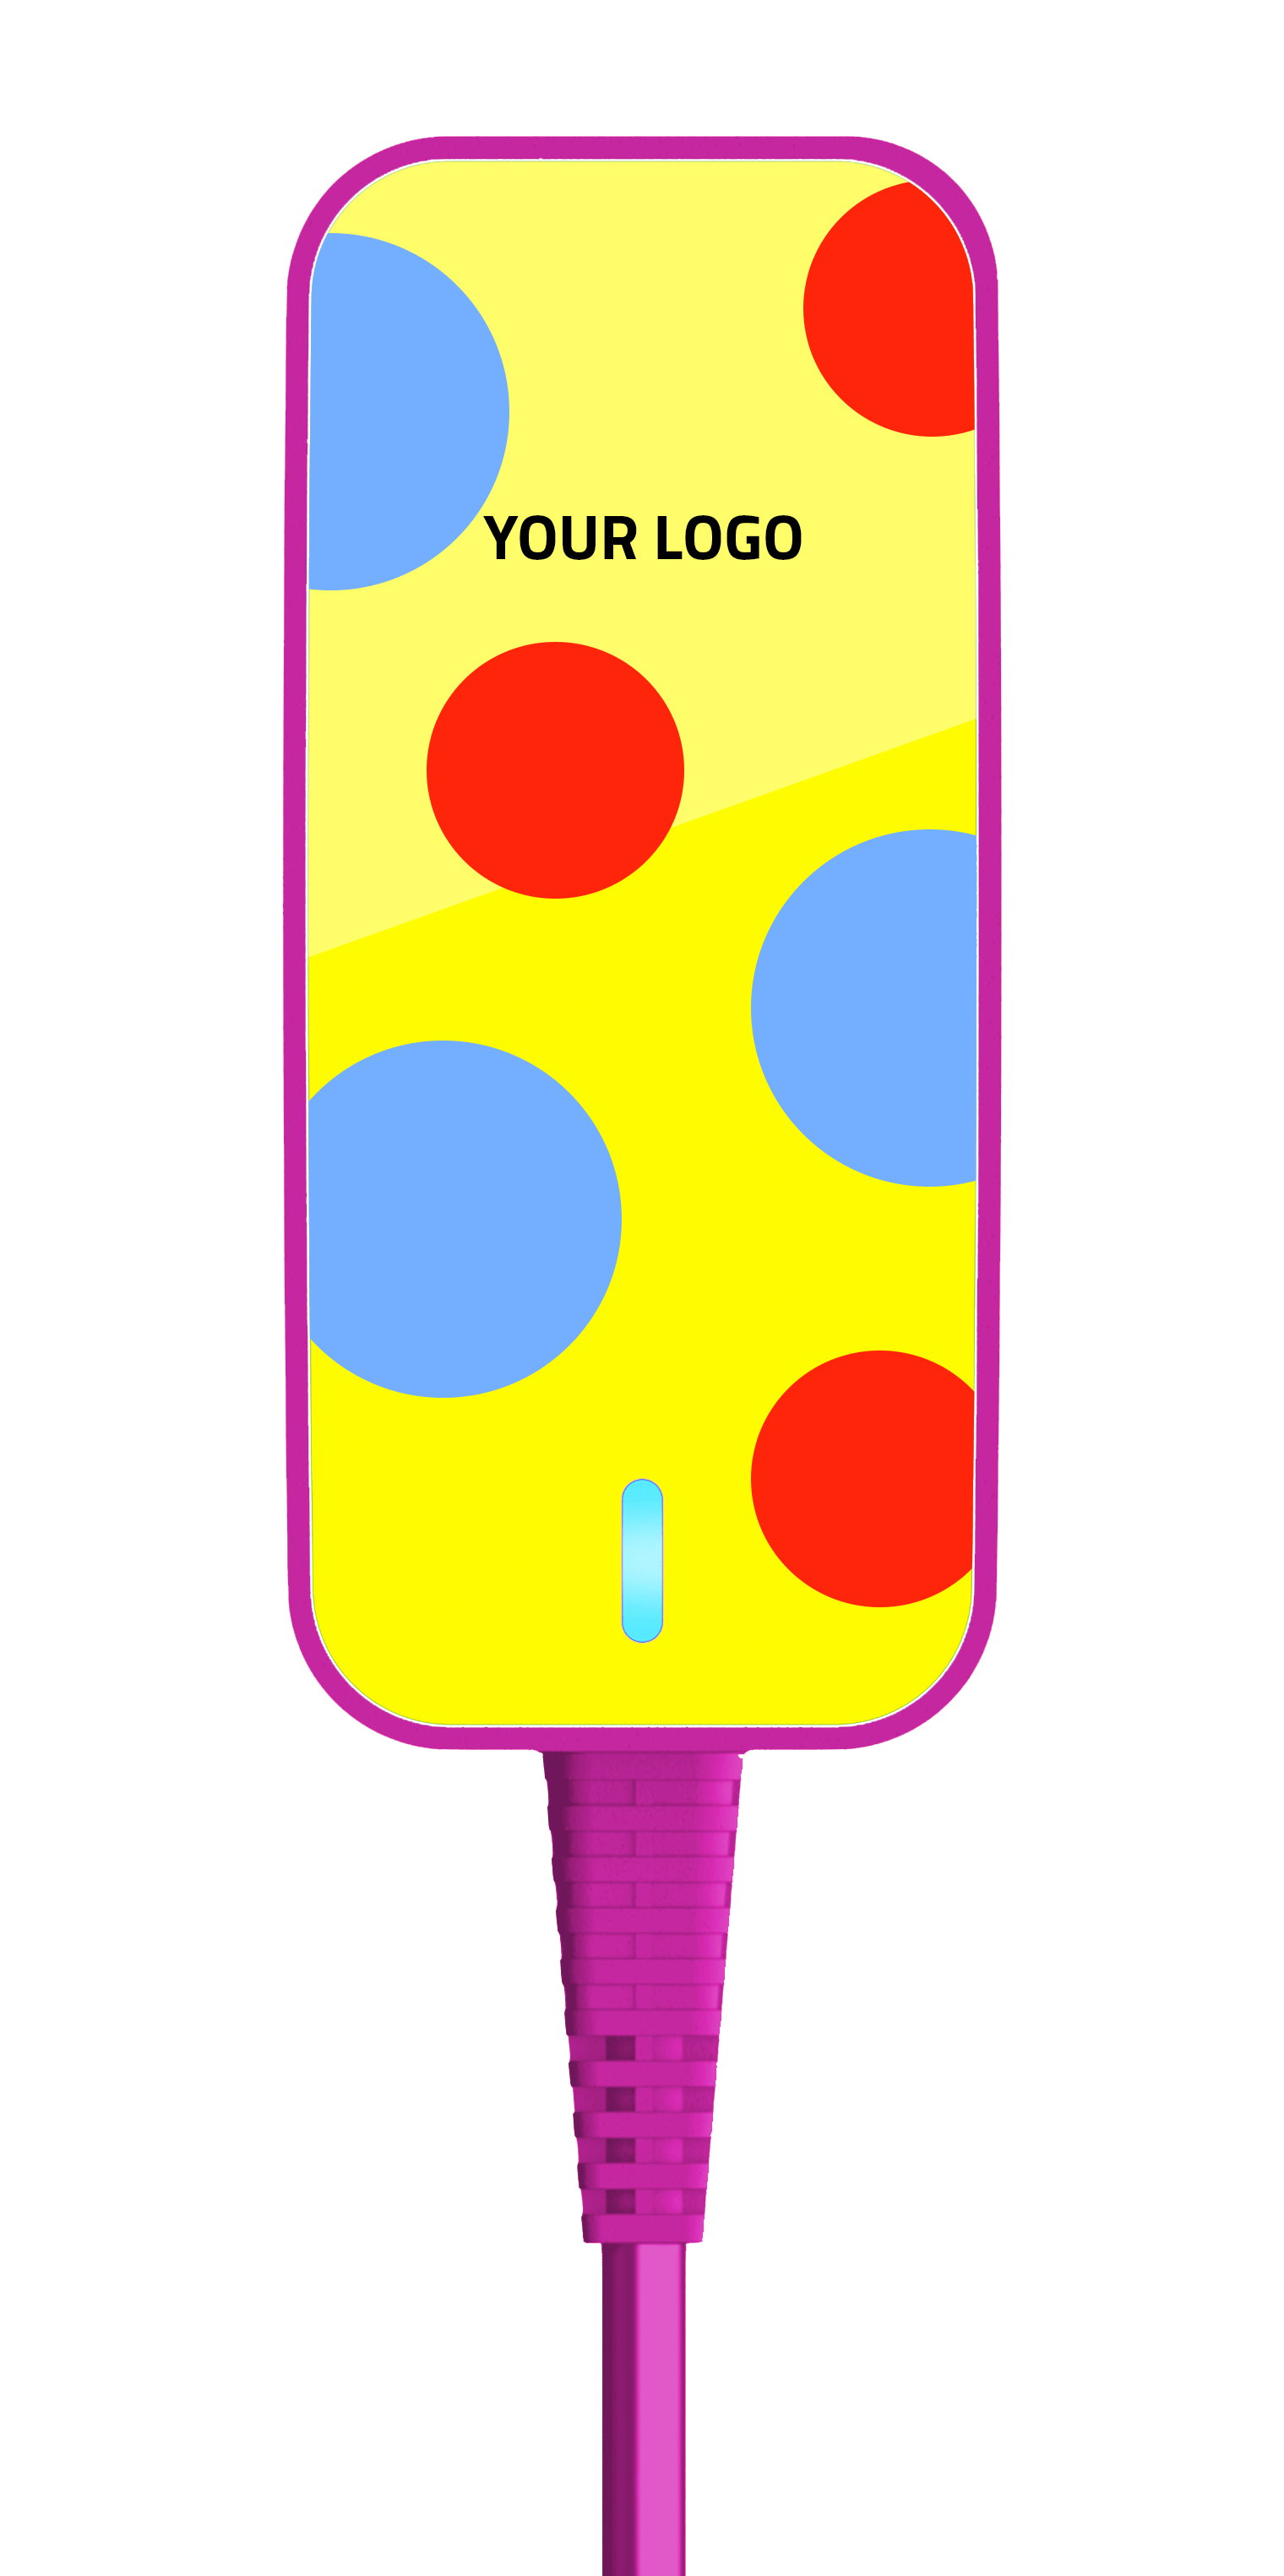 A yellow power supply with a pink trim, colourful dots and a blue light on it.